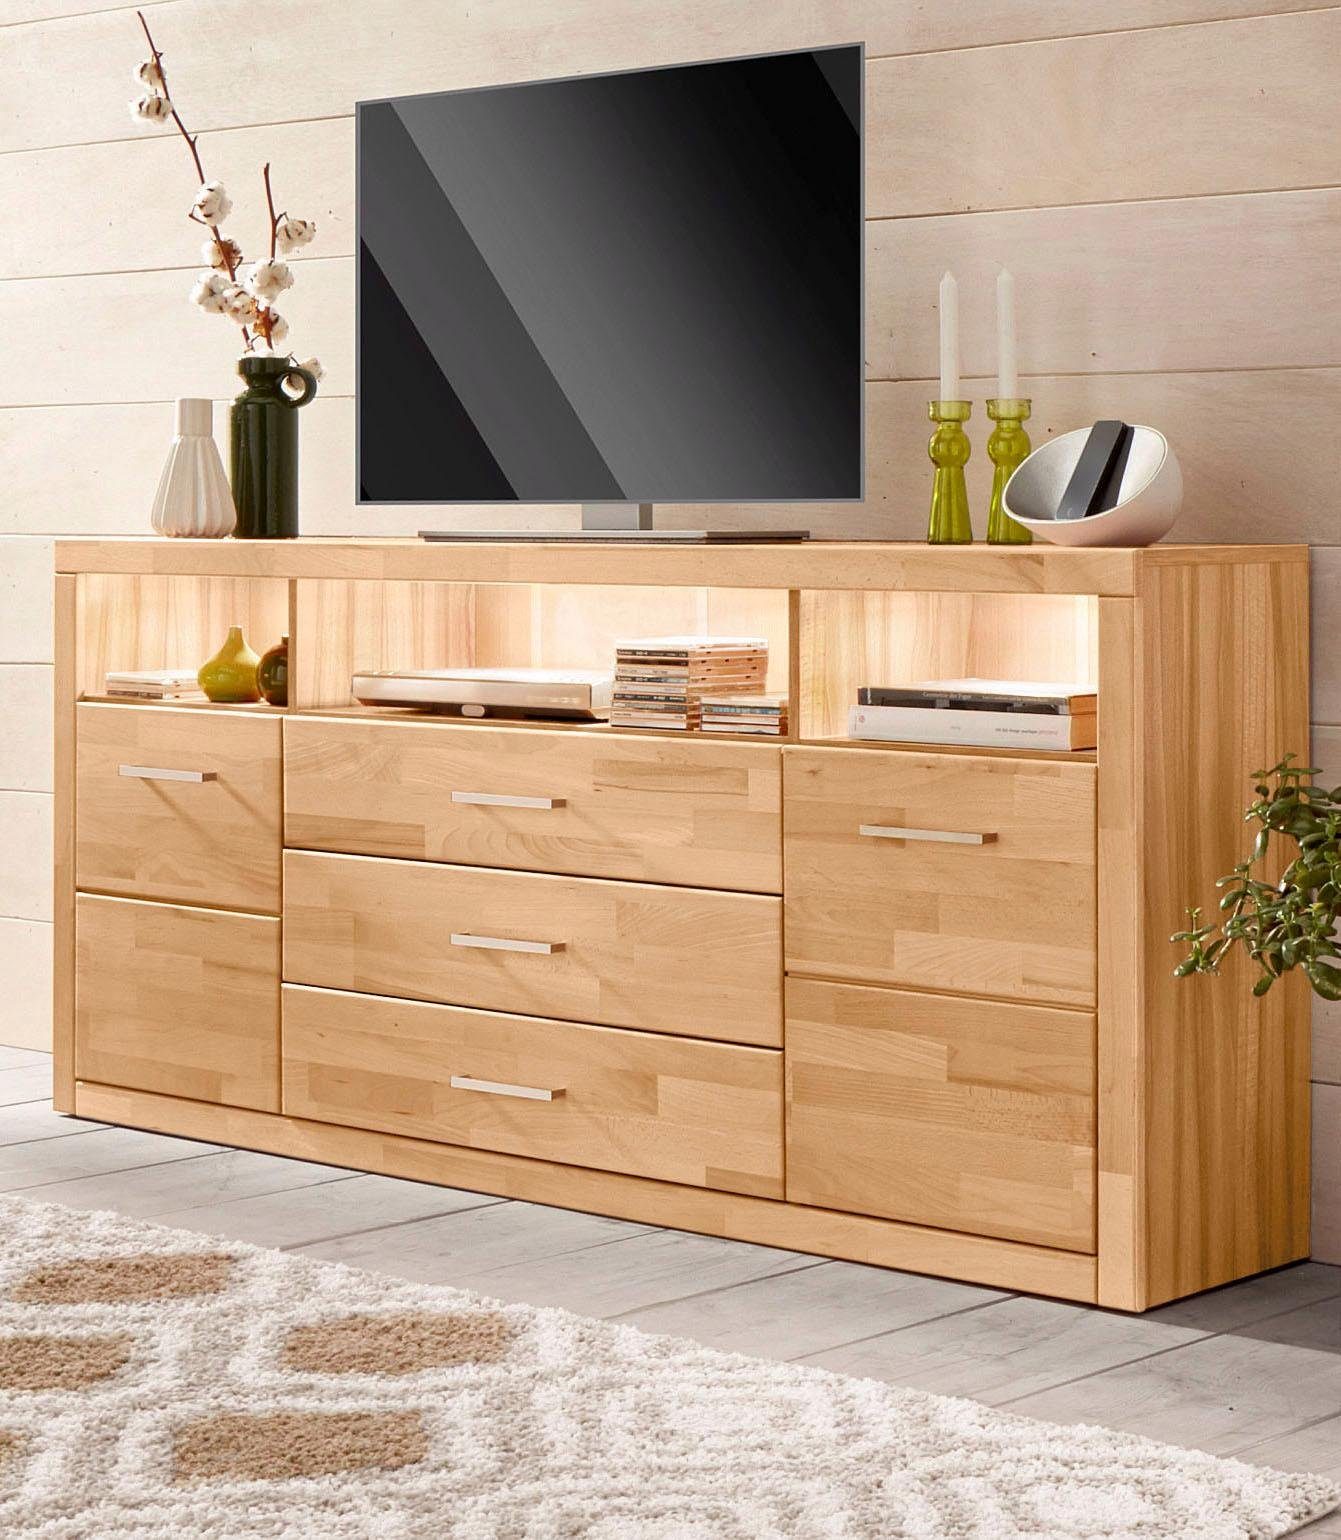 Home affaire Sideboard Ribe, Breite 180 cm